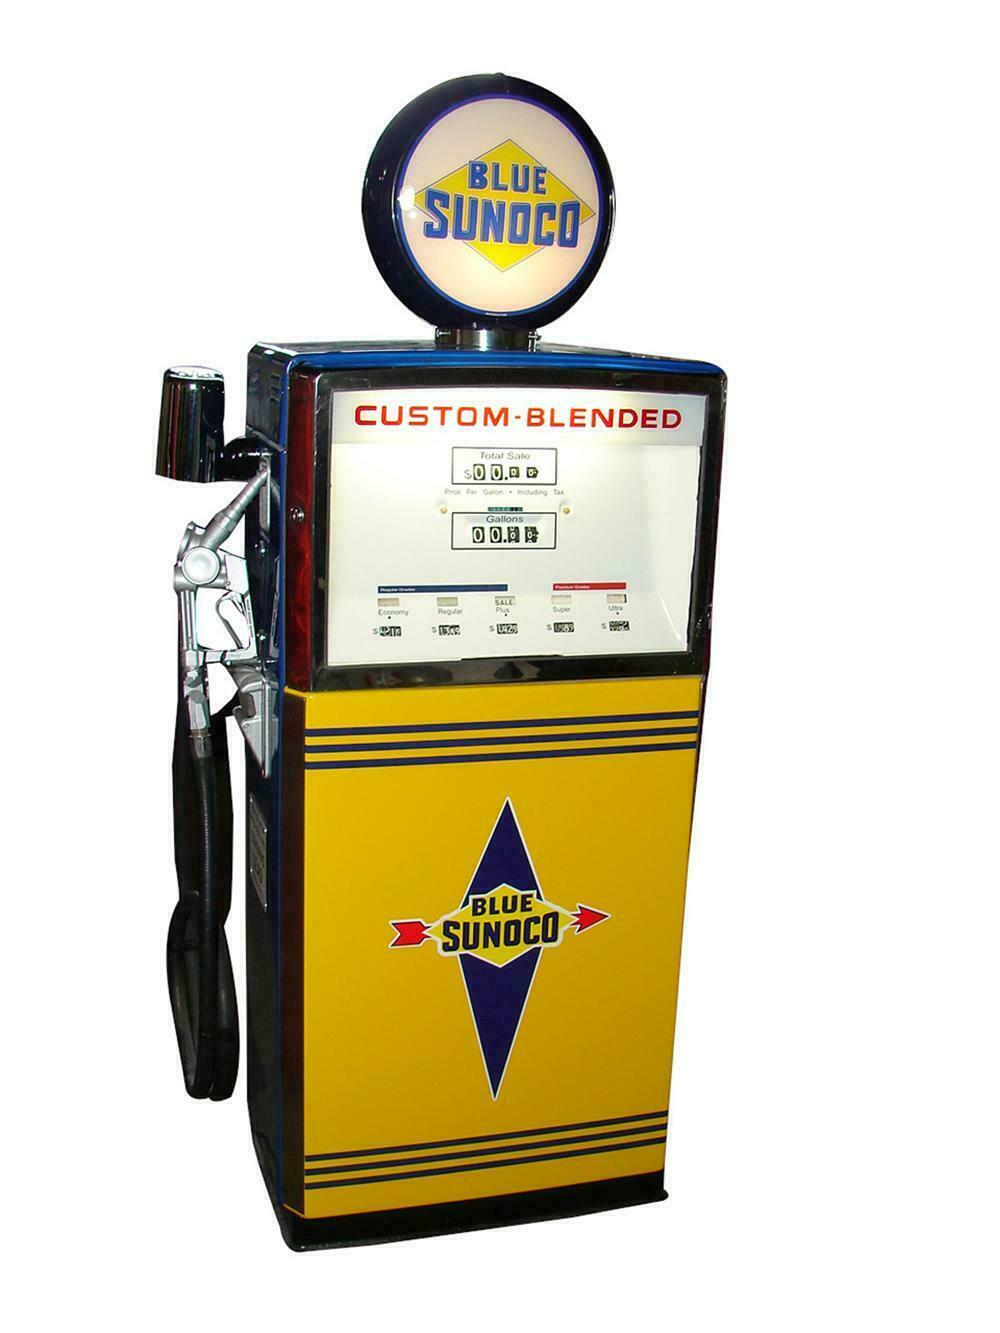 Highly sought after 1960s Wayne Sunoco Gasoline Blend-O-Matic